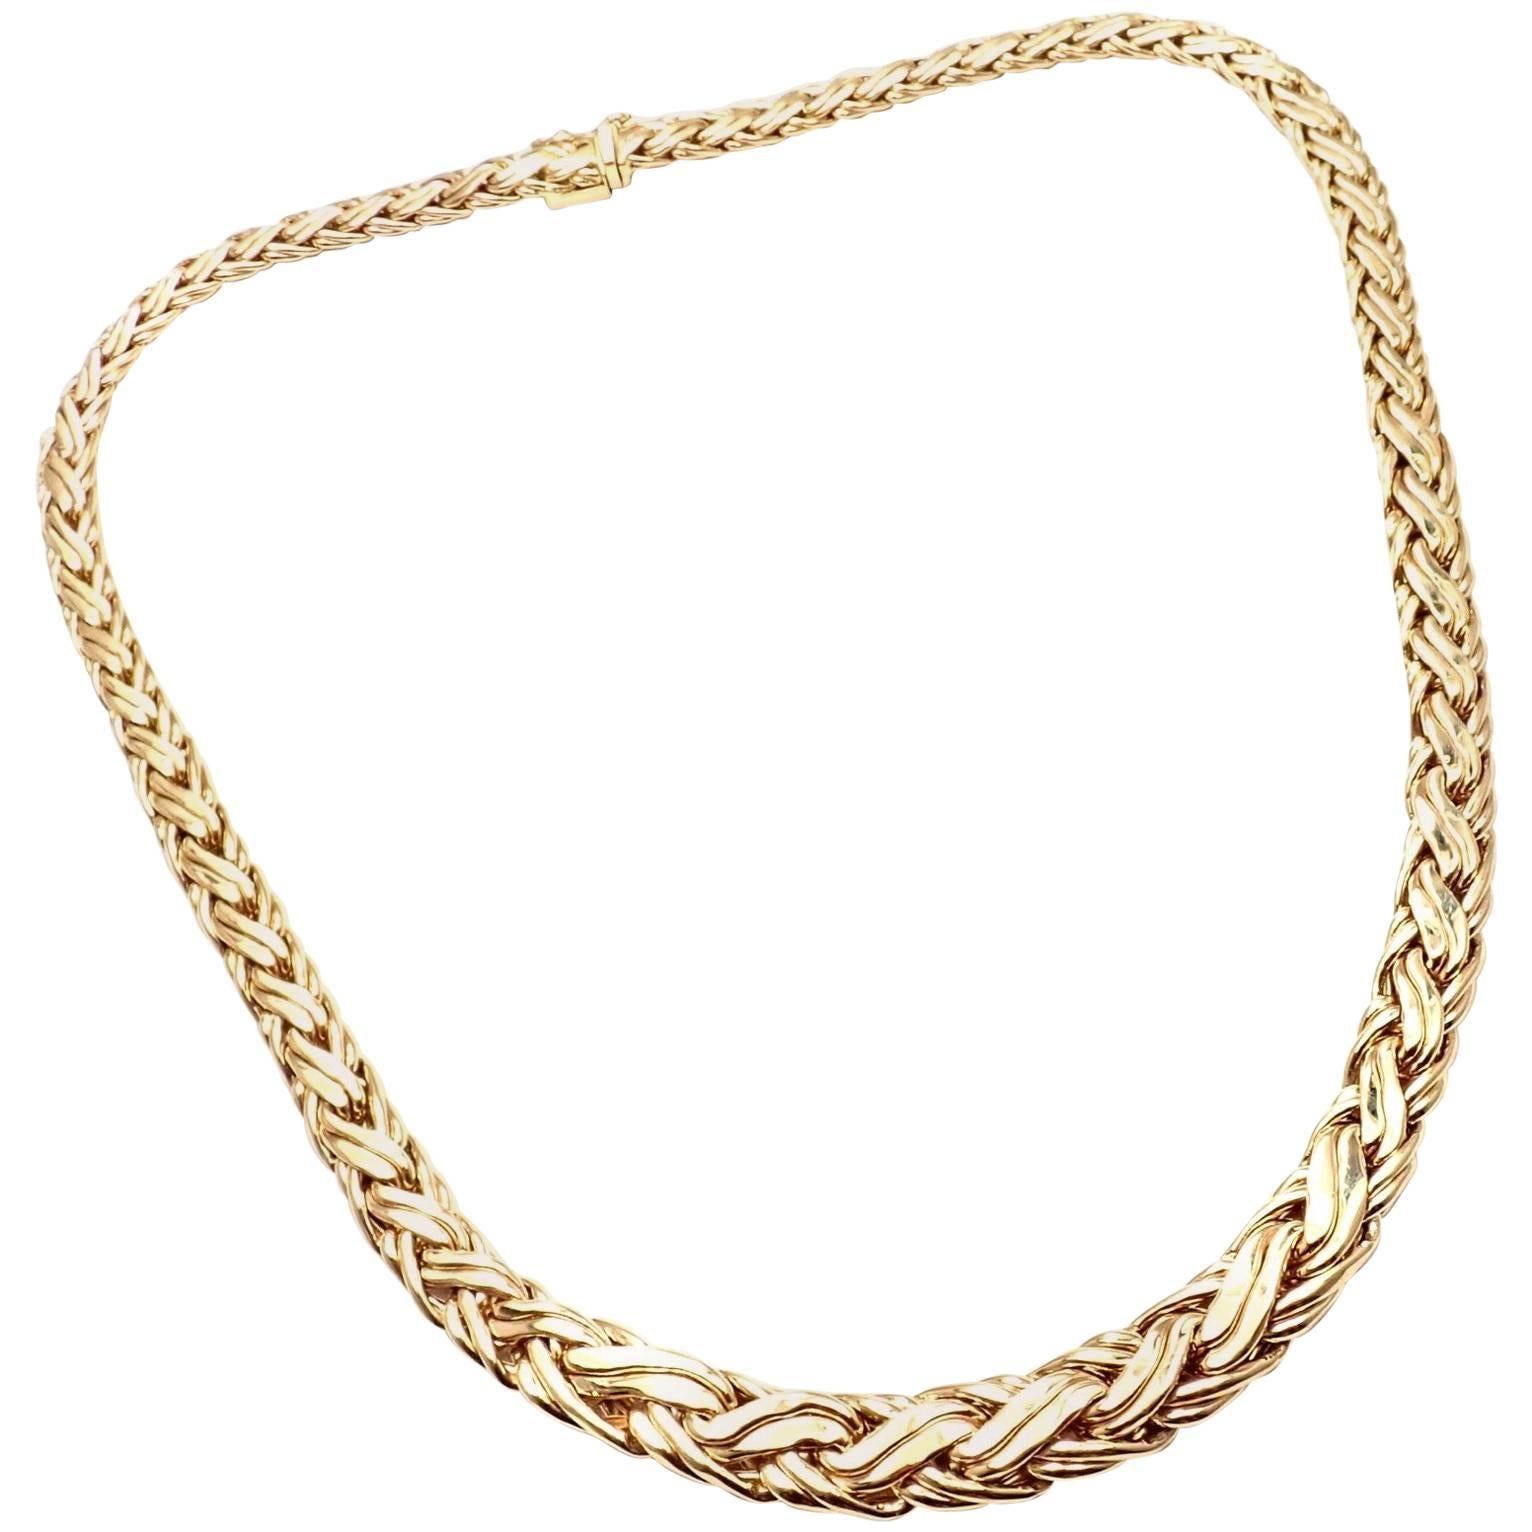 Tiffany & Co. Russian Weave Gradual Link Yellow Gold Necklace